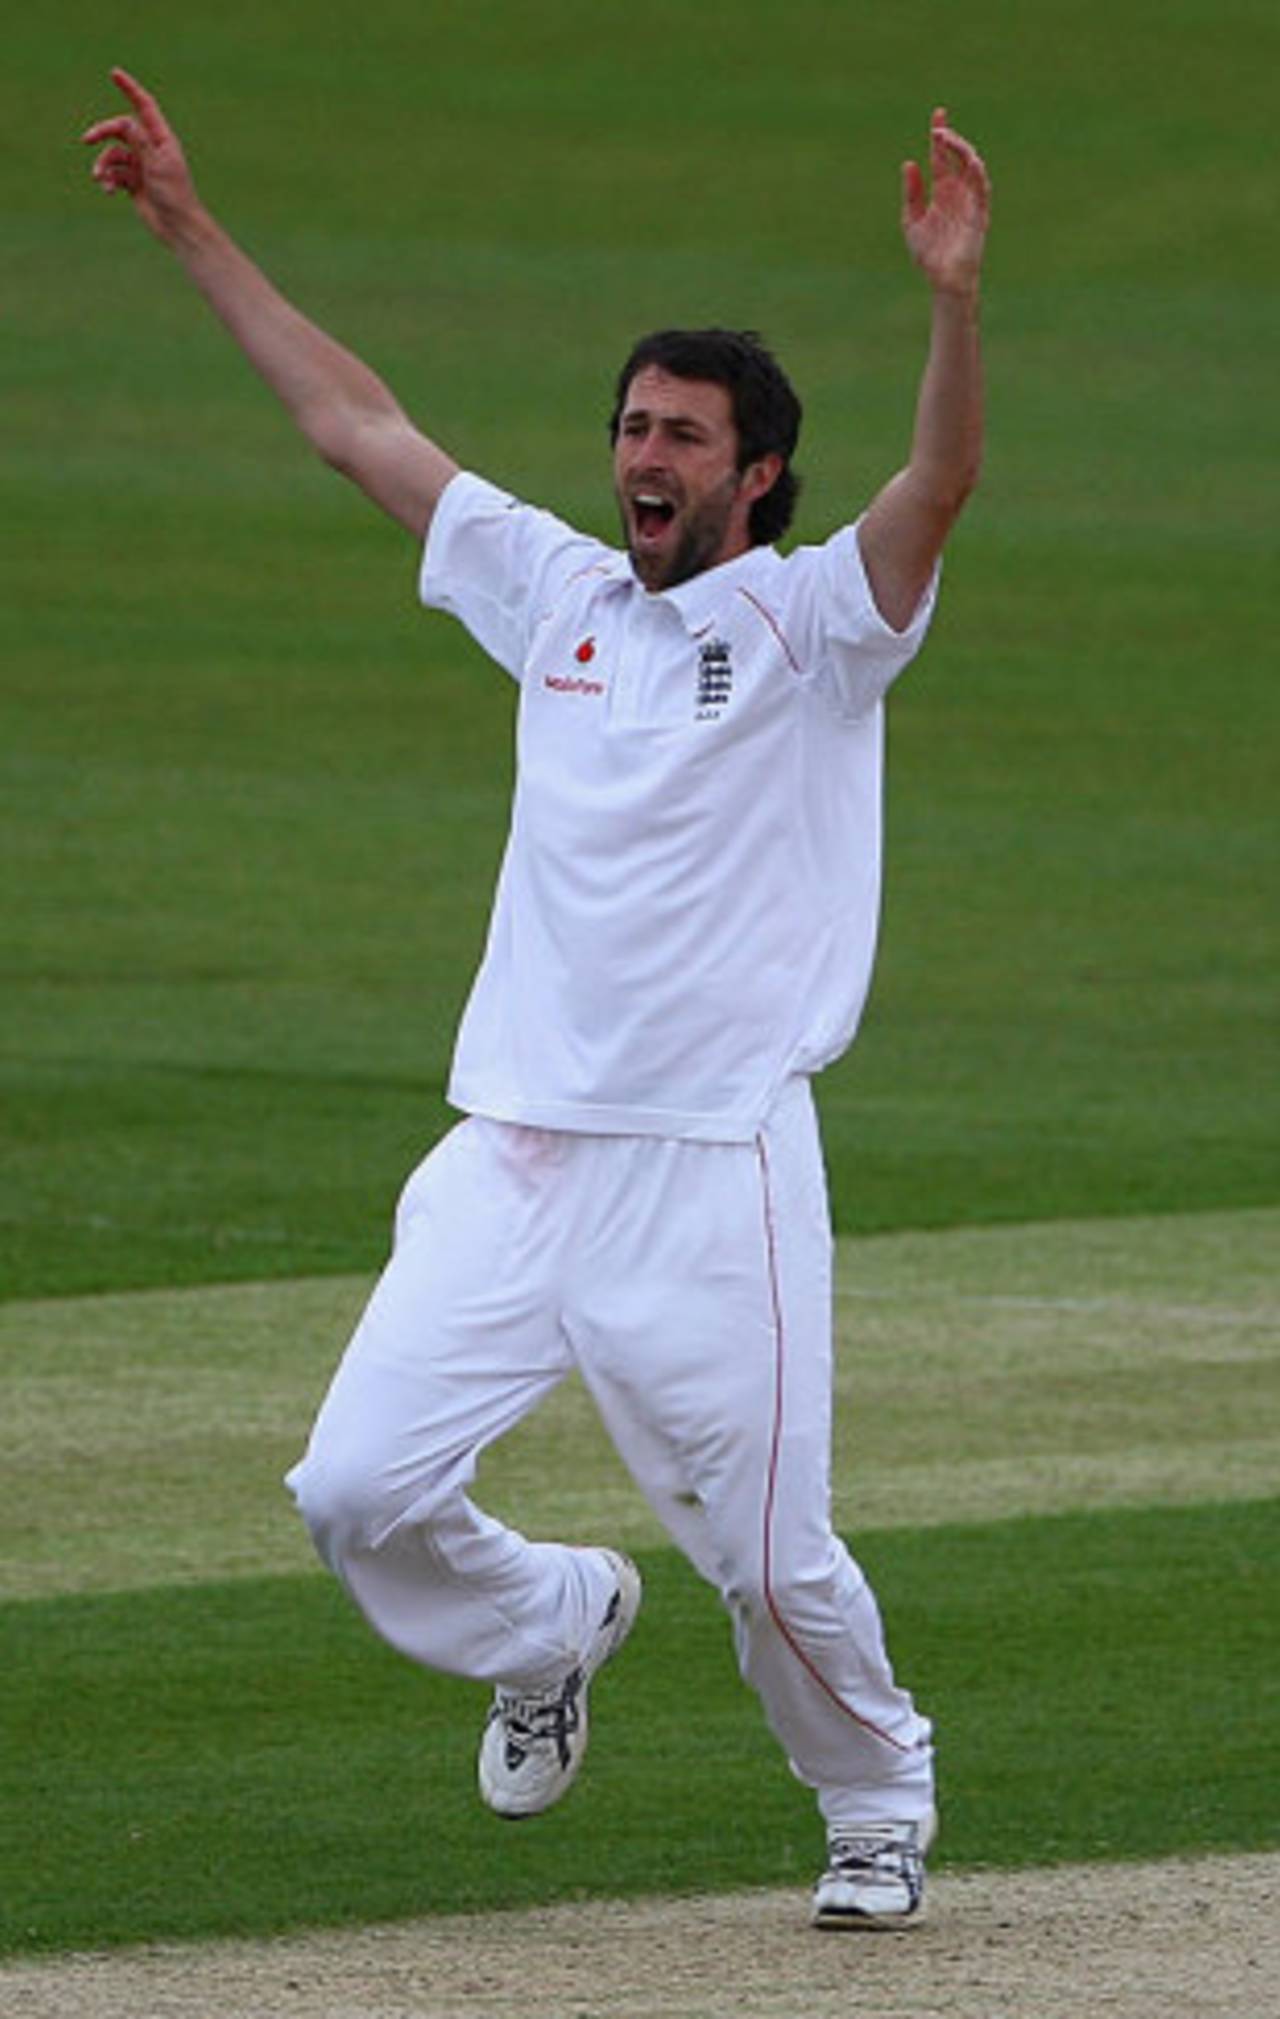 Graham Onions struck with two wickets in an over, England v West Indies, 2nd Test, Chester-le-Street, 4th day, May 17, 2009